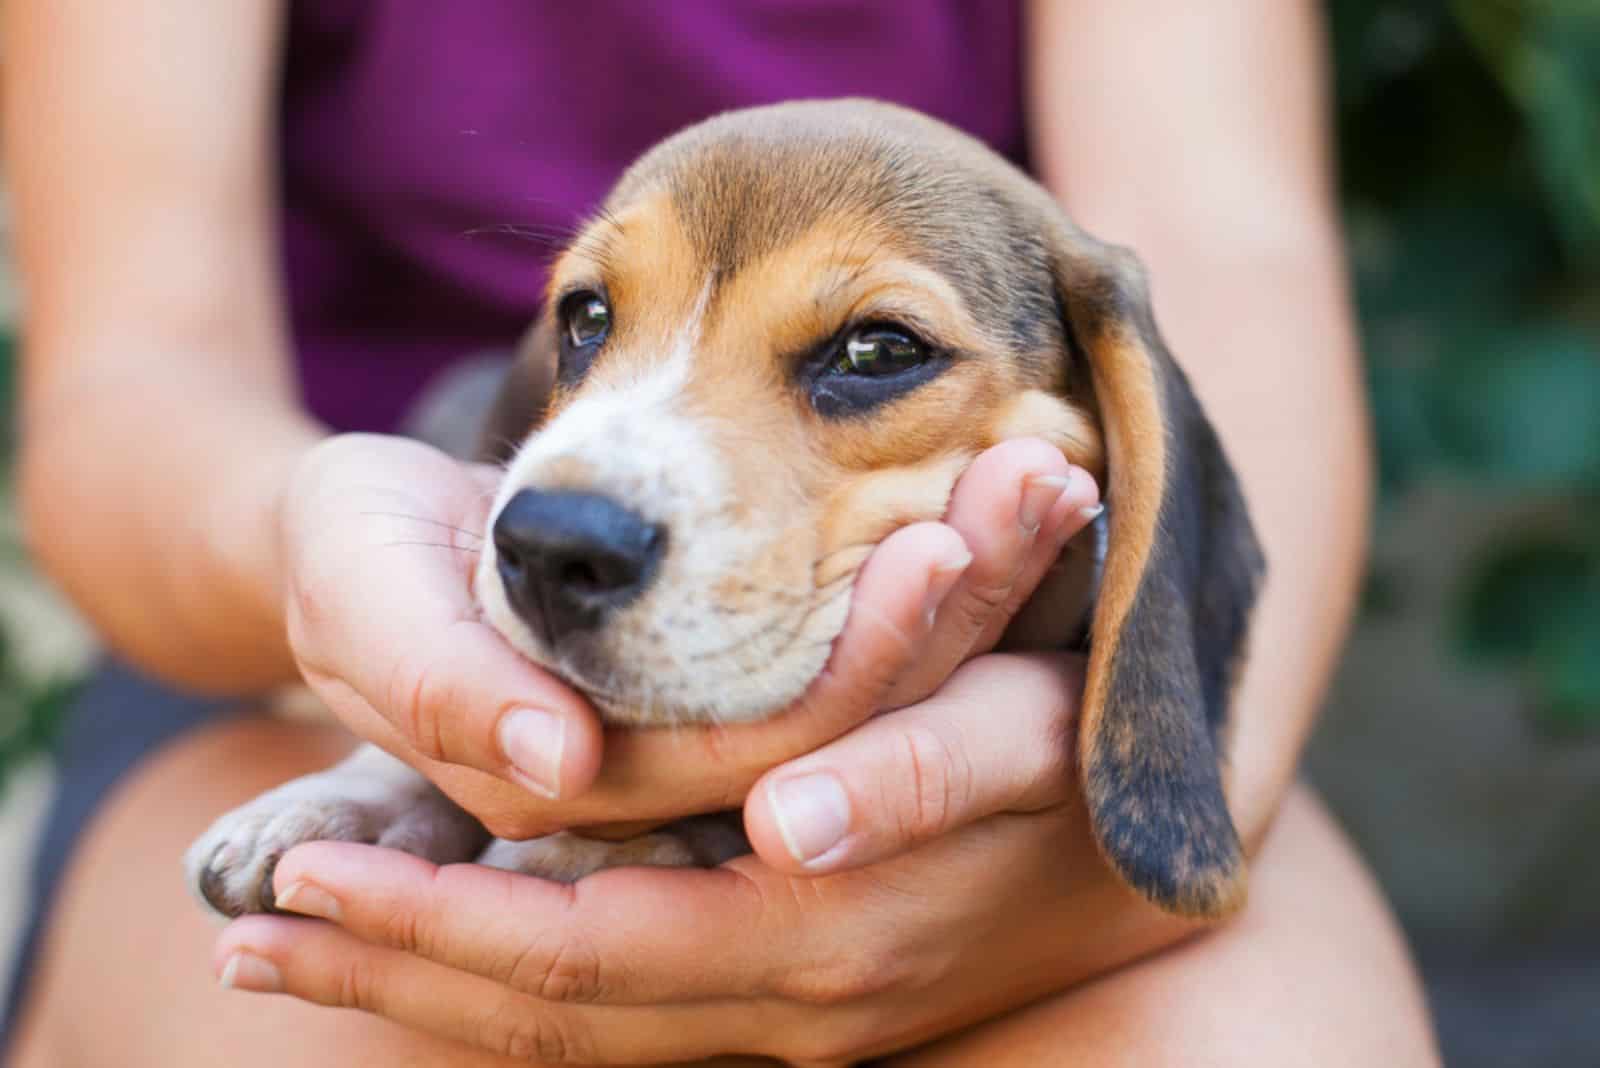 Adorable beagle puppy cuddling with female owner